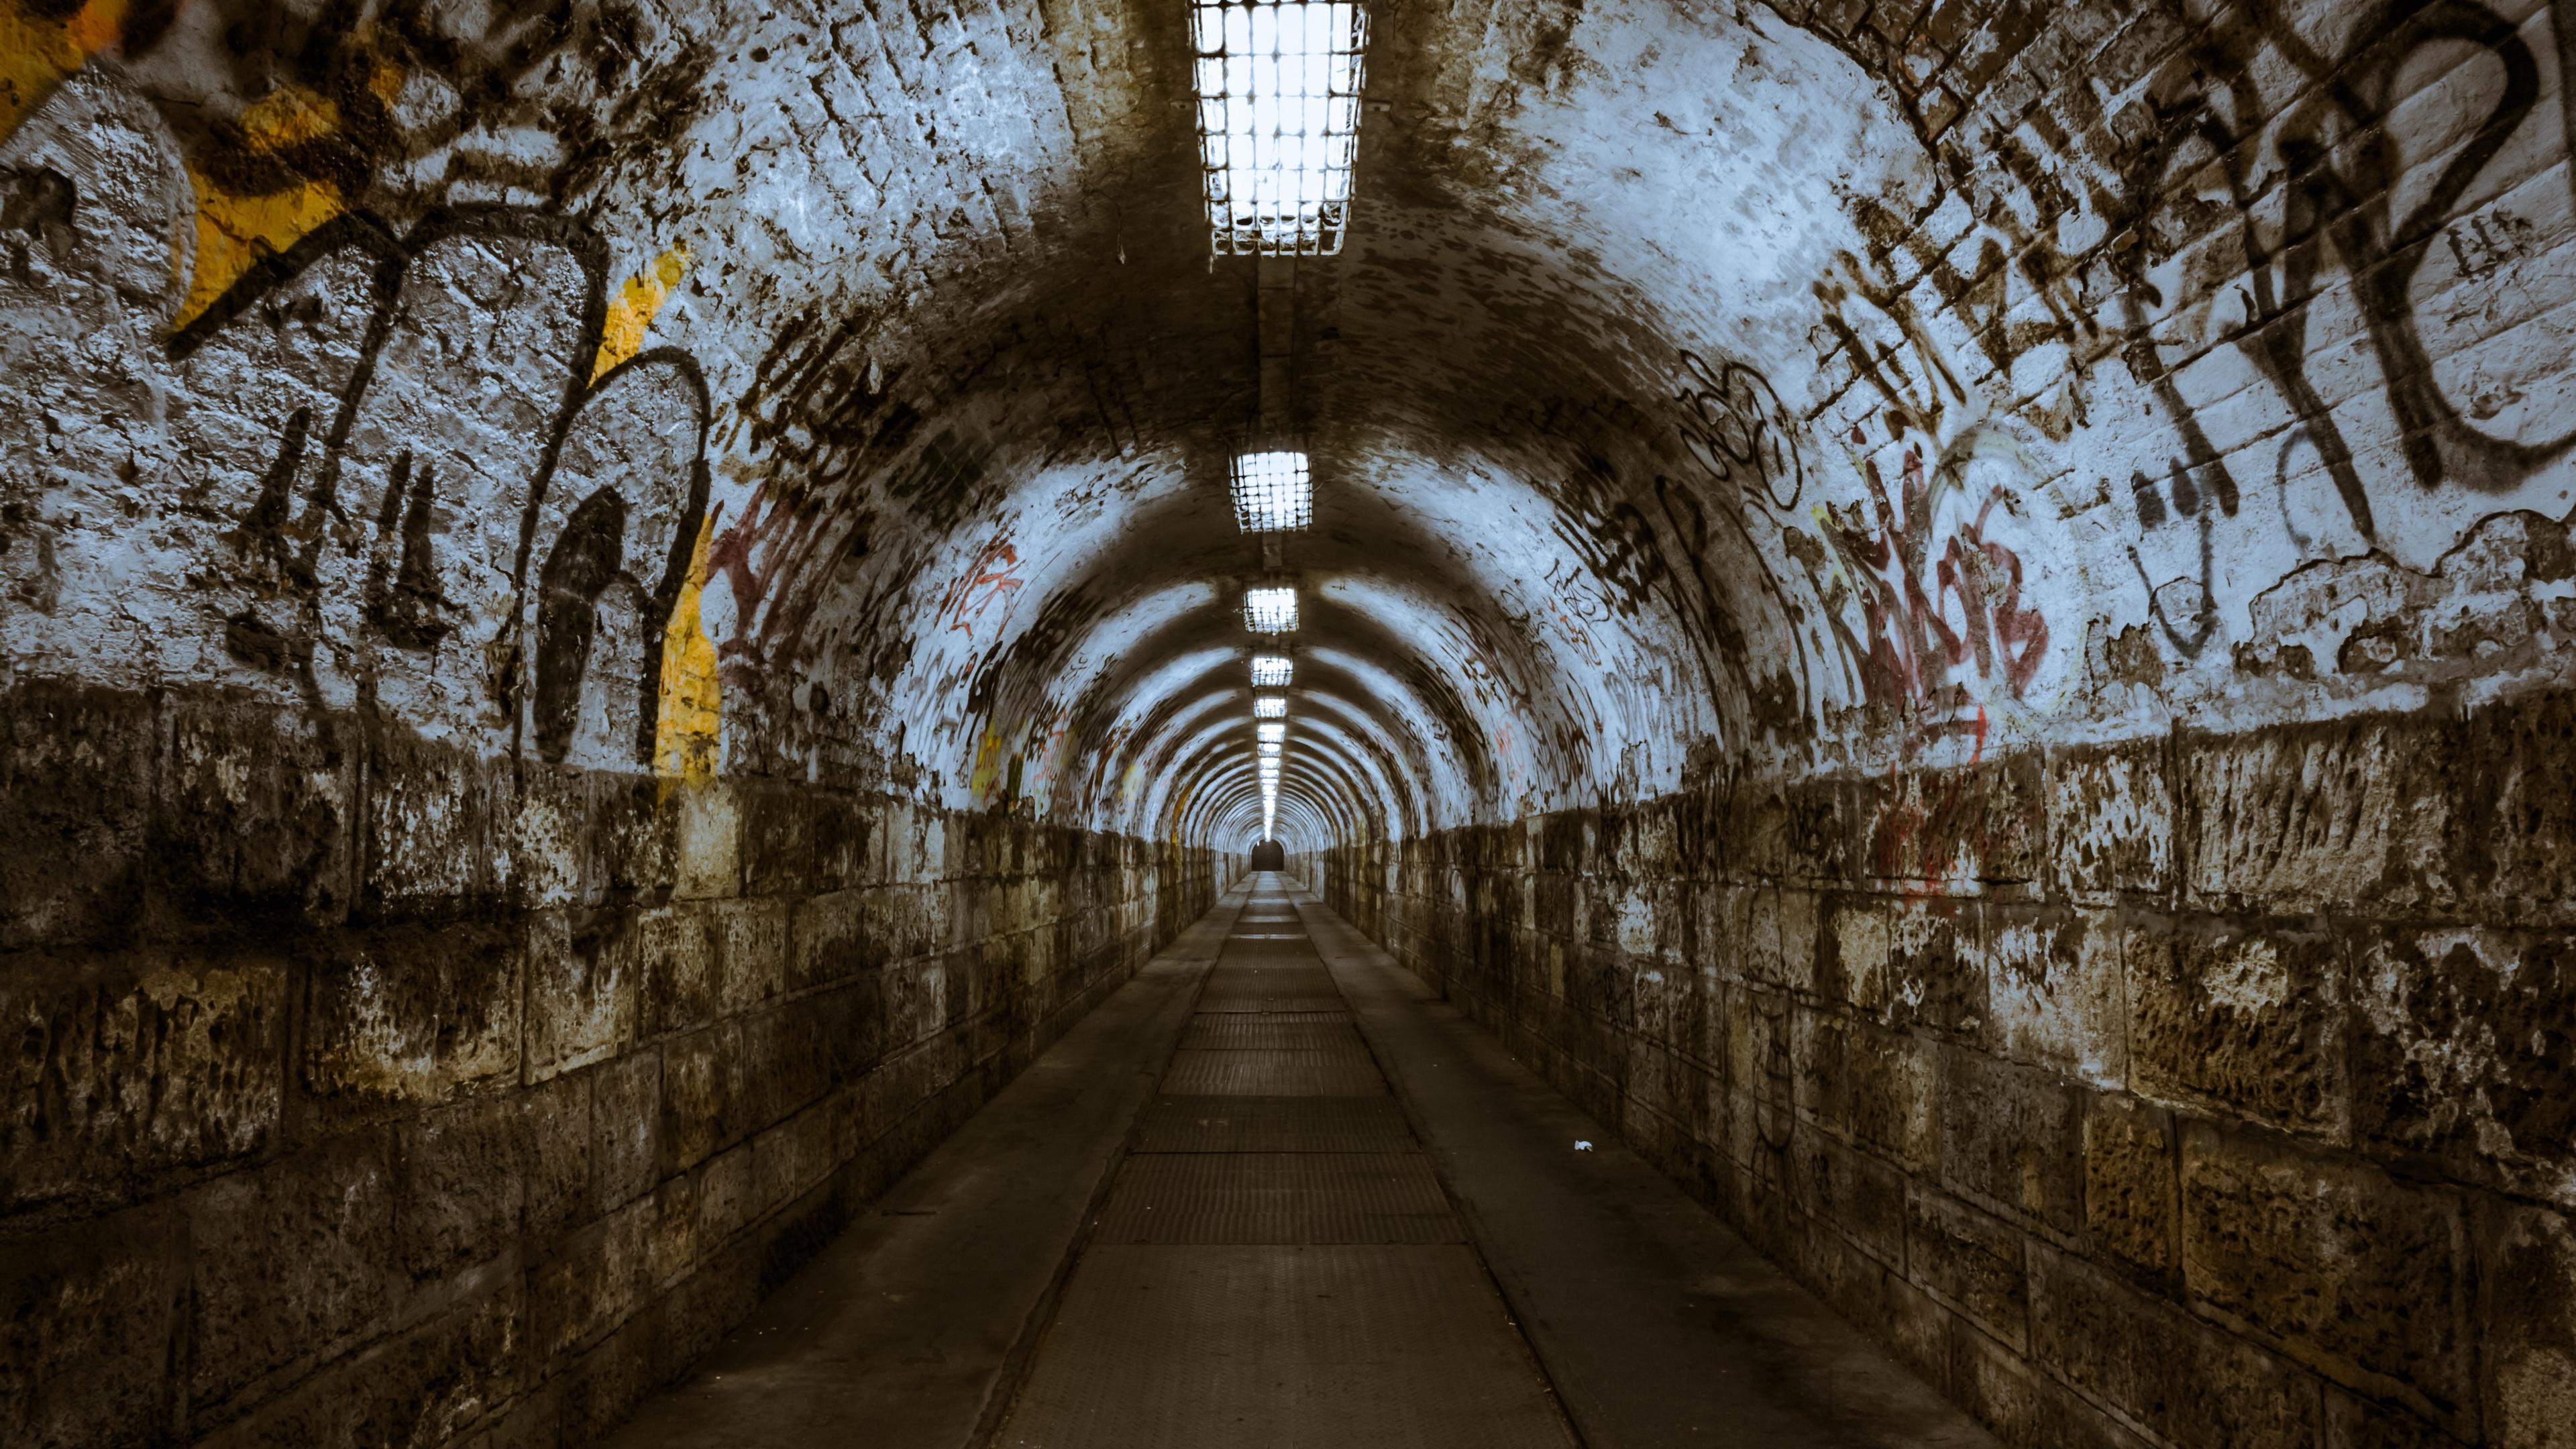 Download wallpapers 3840x2160 tunnel, underground, abandoned.